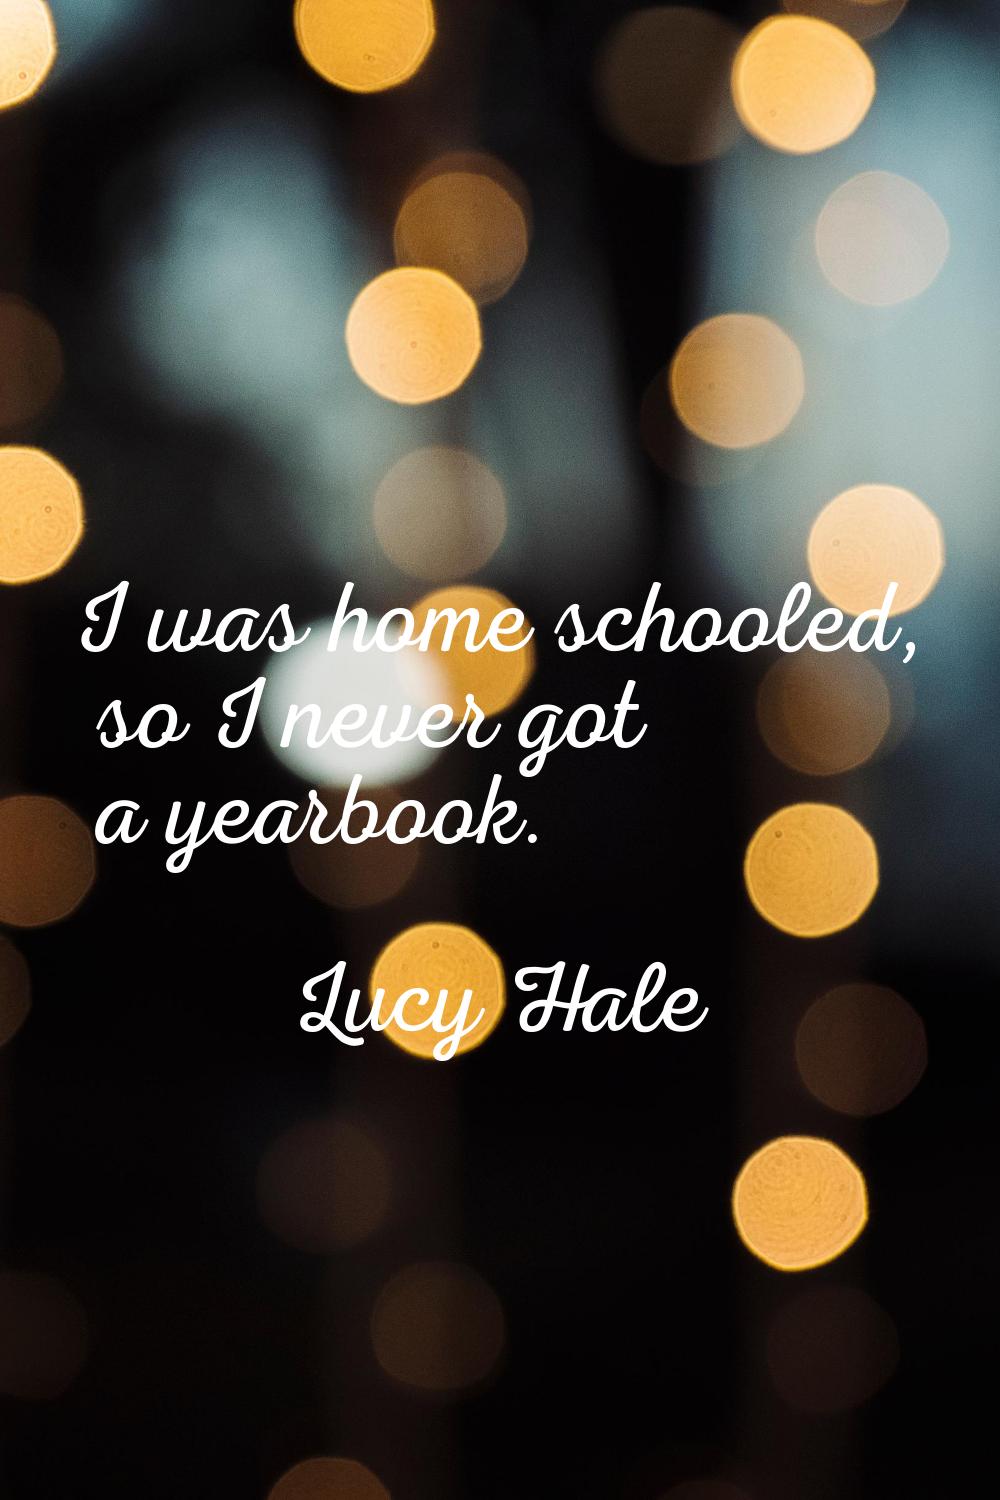 I was home schooled, so I never got a yearbook.